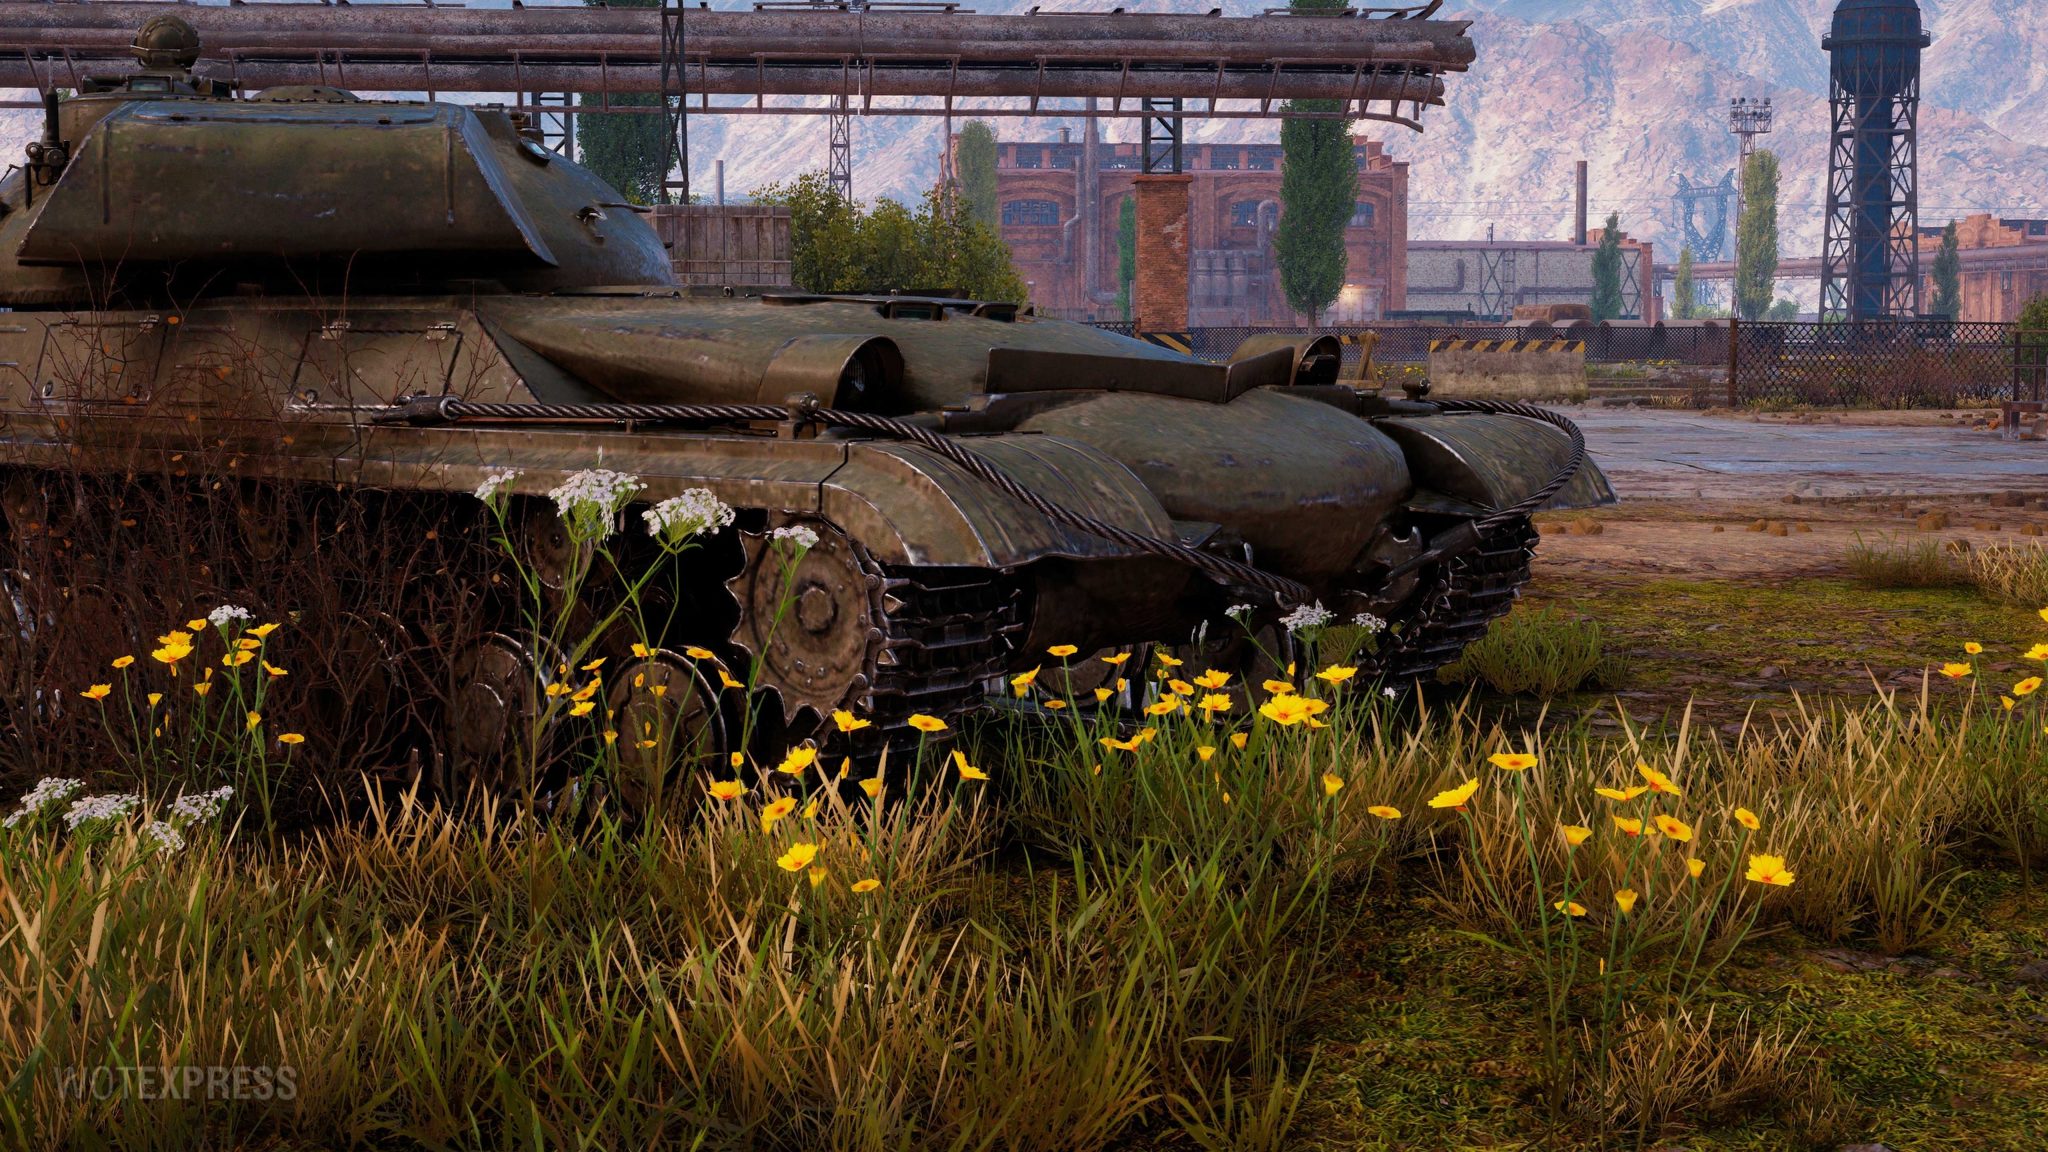 World of Tanks - Object 283 - hd model - in game pictures.